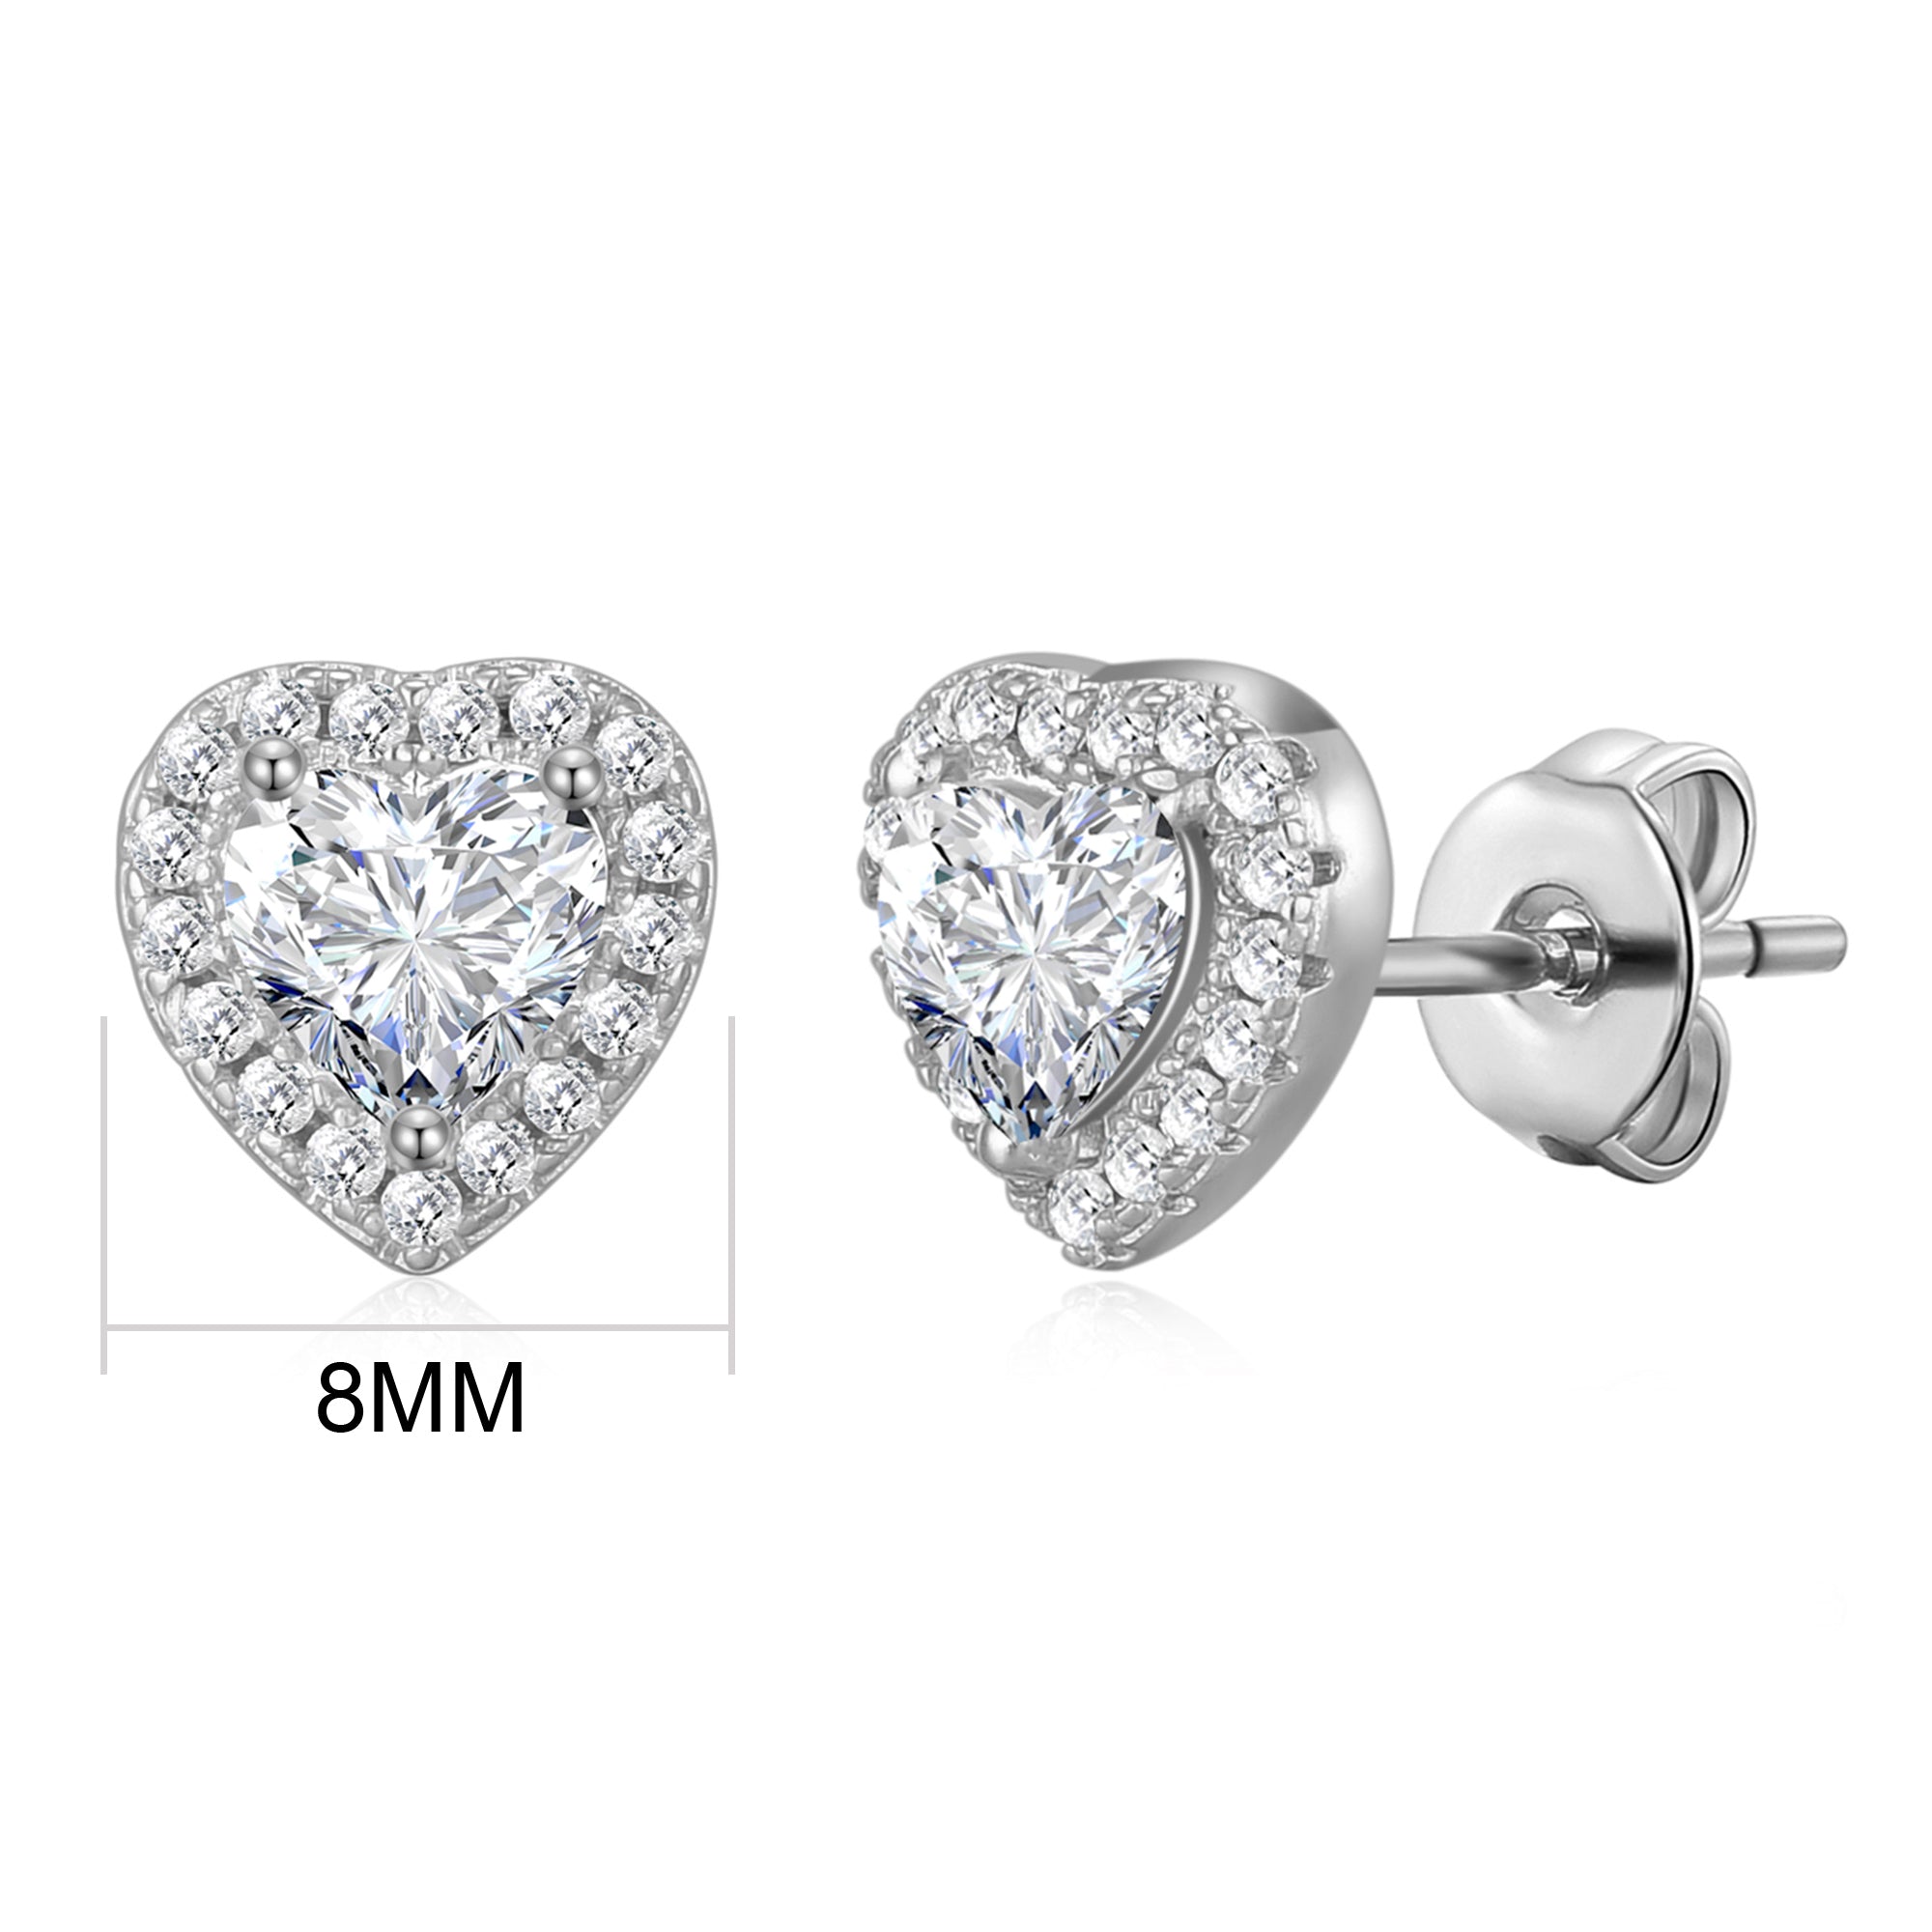 Silver Plated Heart Halo Earrings Created with Zircondia® Crystals